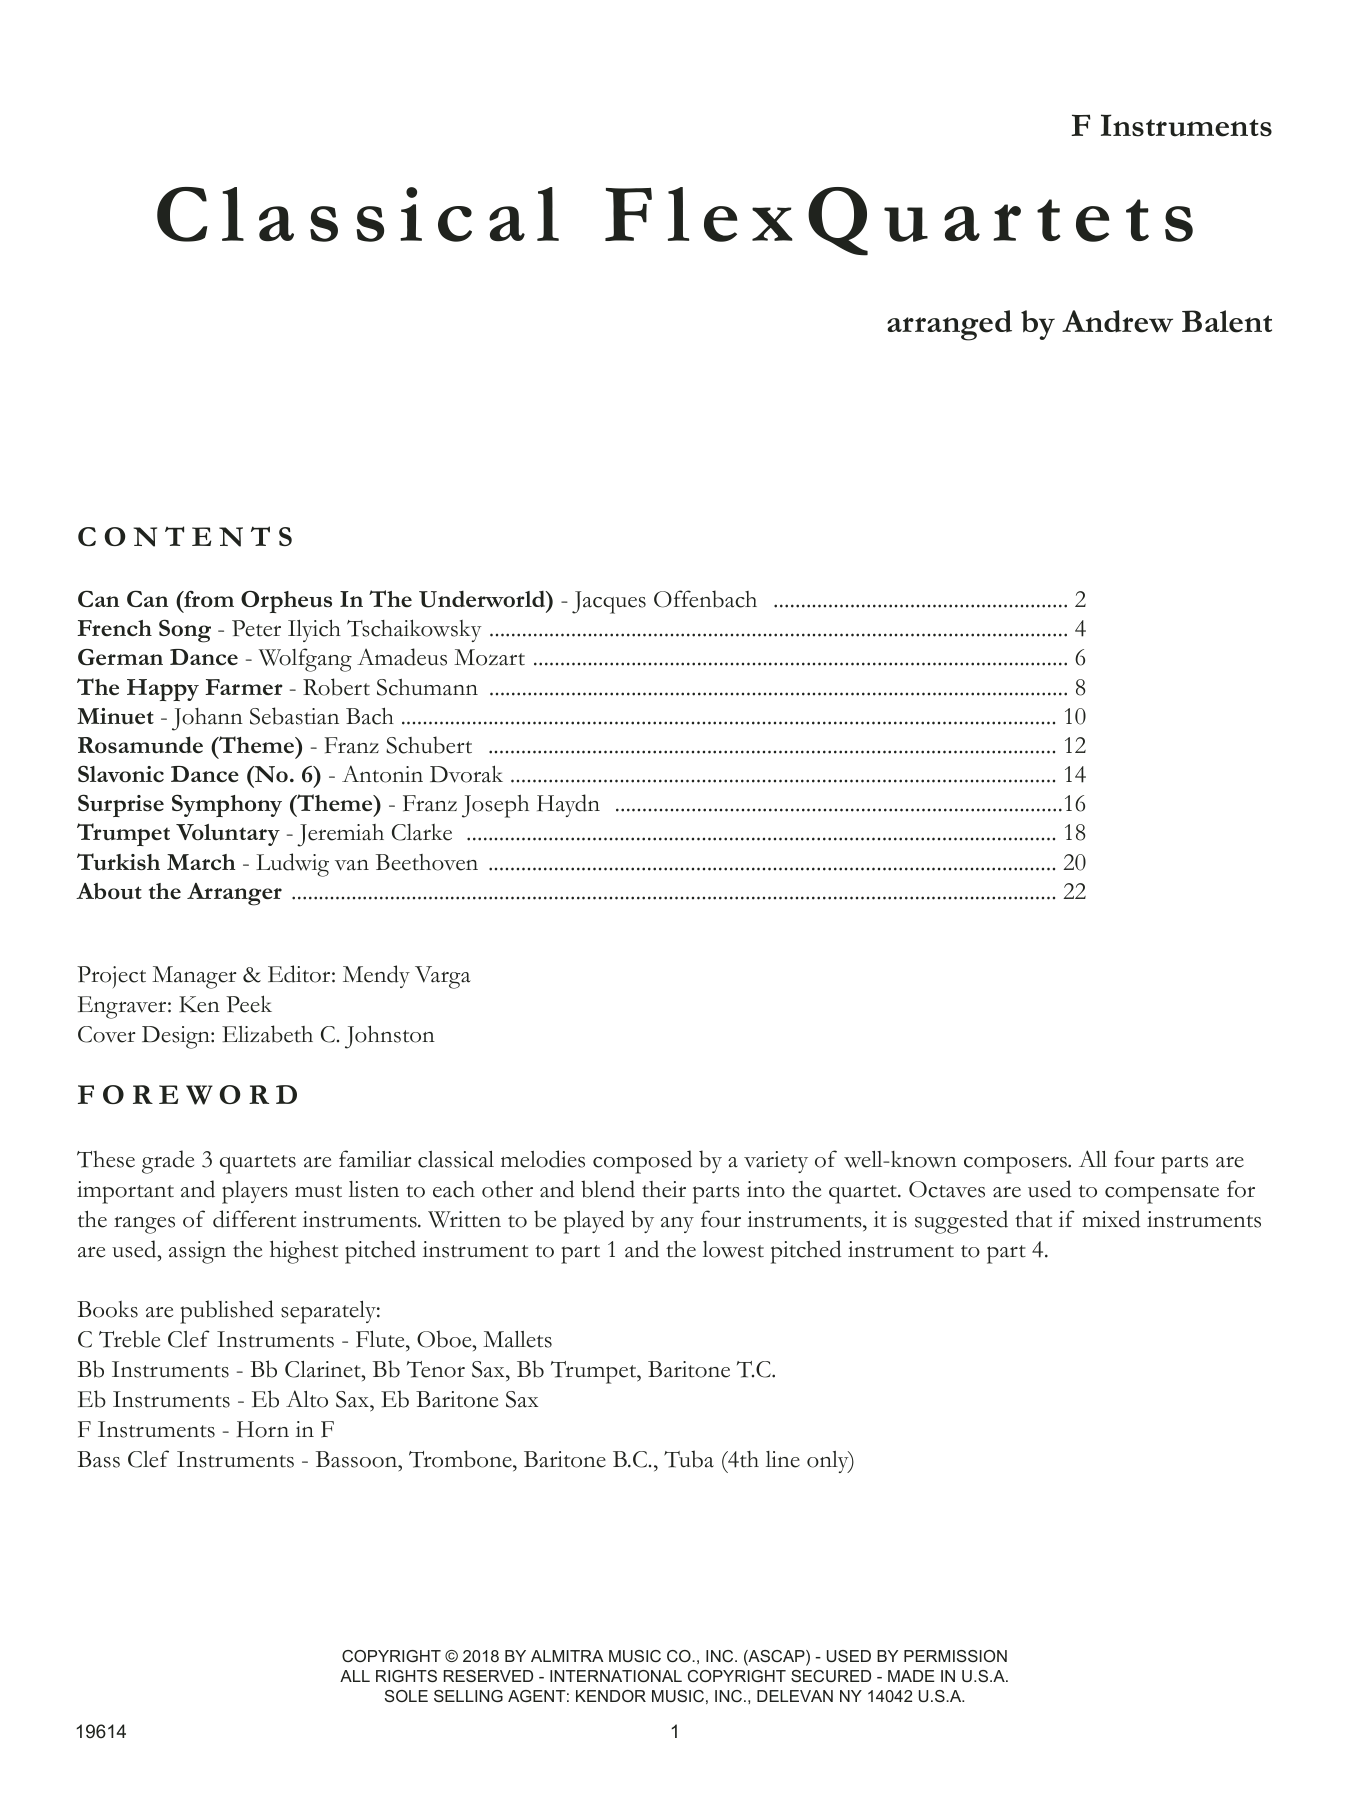 Andrew Balent Classical Flexquartets - F Instruments sheet music preview music notes and score for Brass Ensemble including 22 page(s)